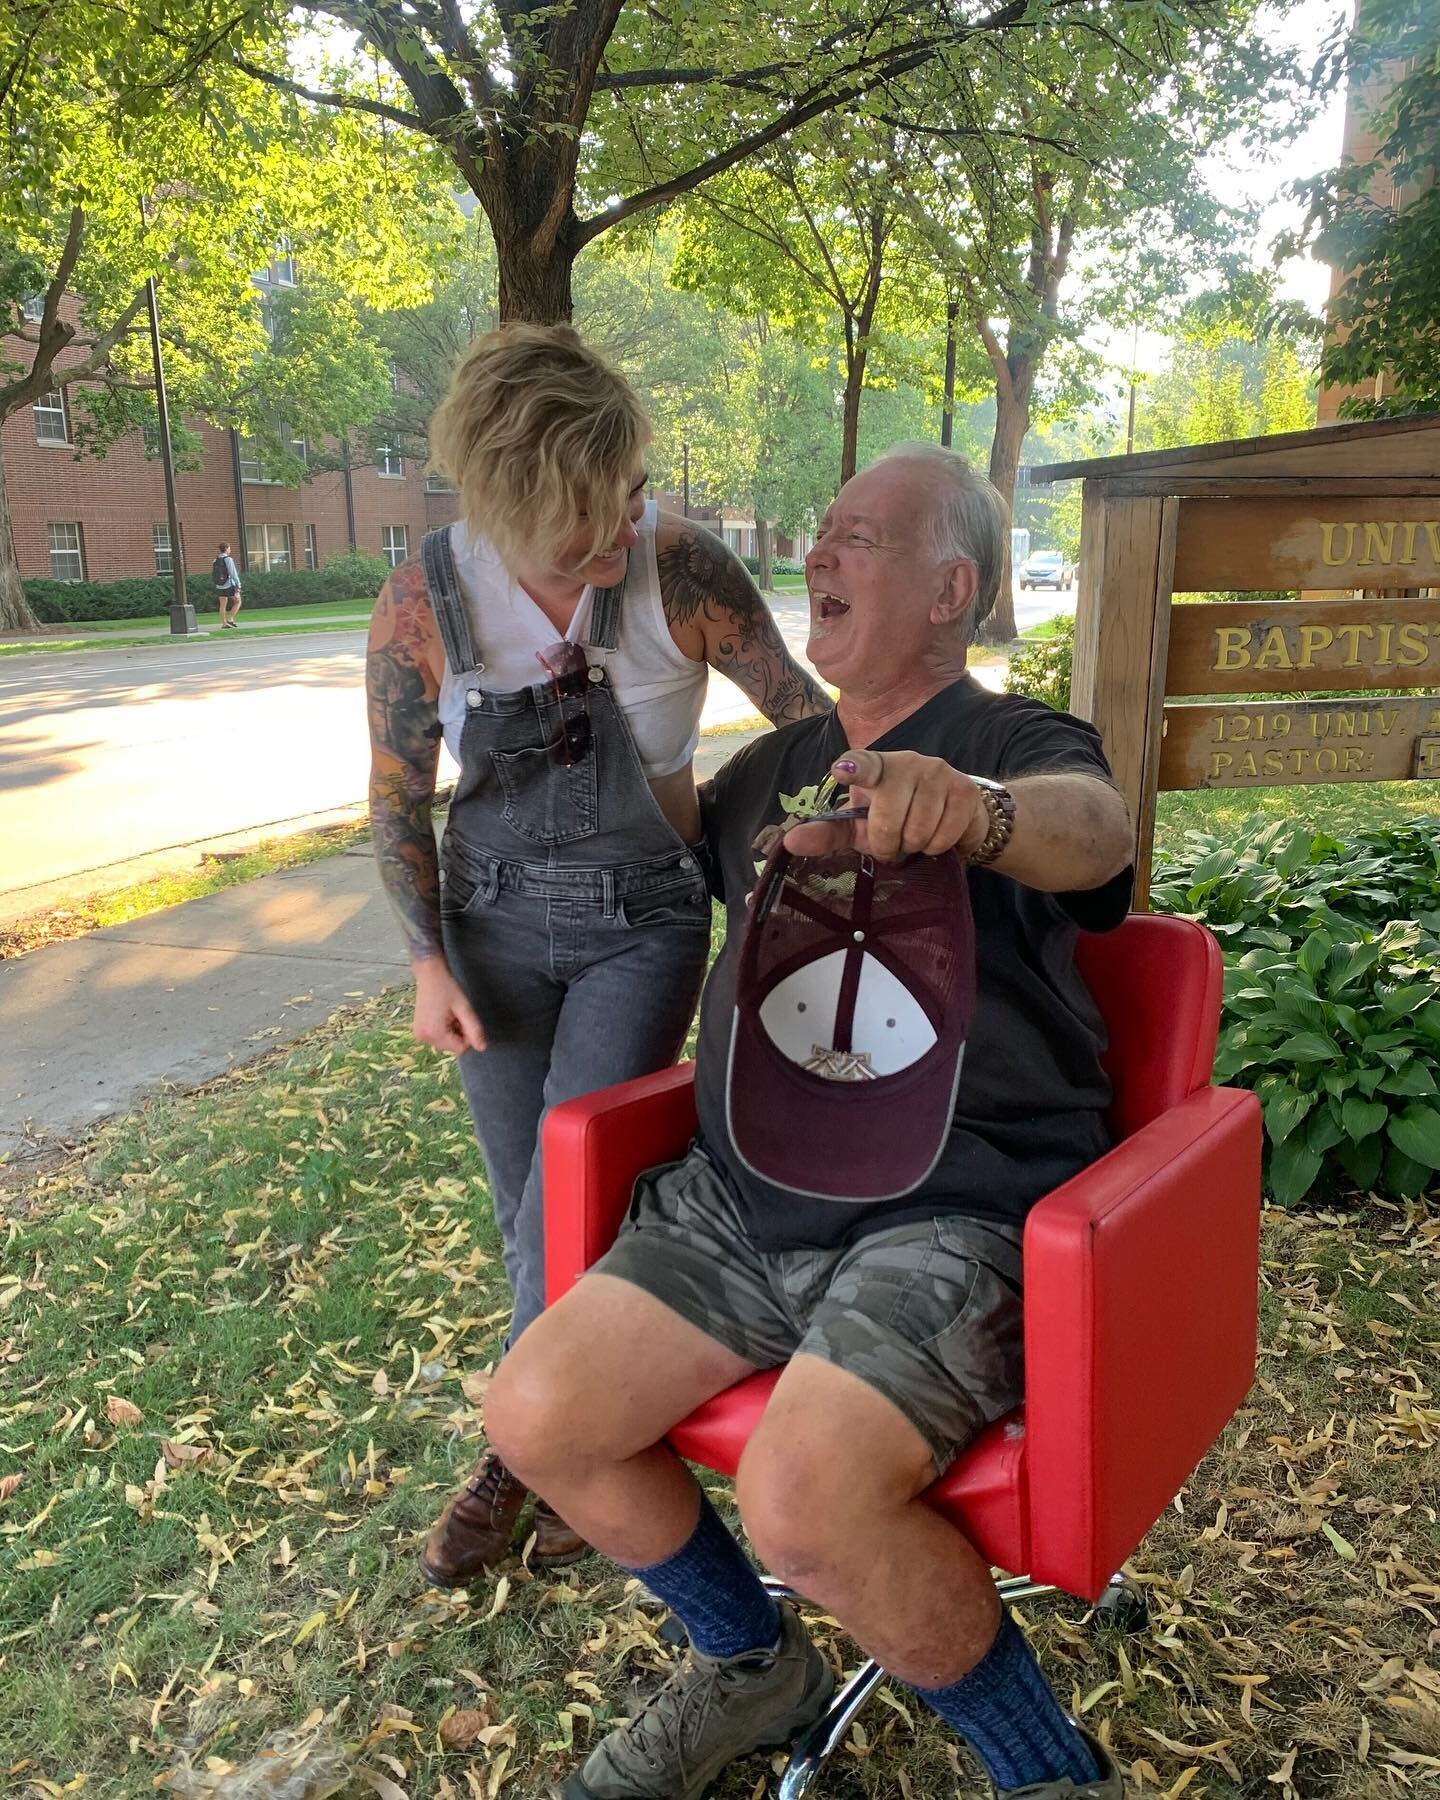 We just want to take a moment to say THANK YOU to everyone who has donated to our Red Chair fundraiser so far 🥰

Our goal is to raise $3,000 to buy 10 NEW rolling chairs for our upcoming Red Chair Projects to serve as many people as possible. If you